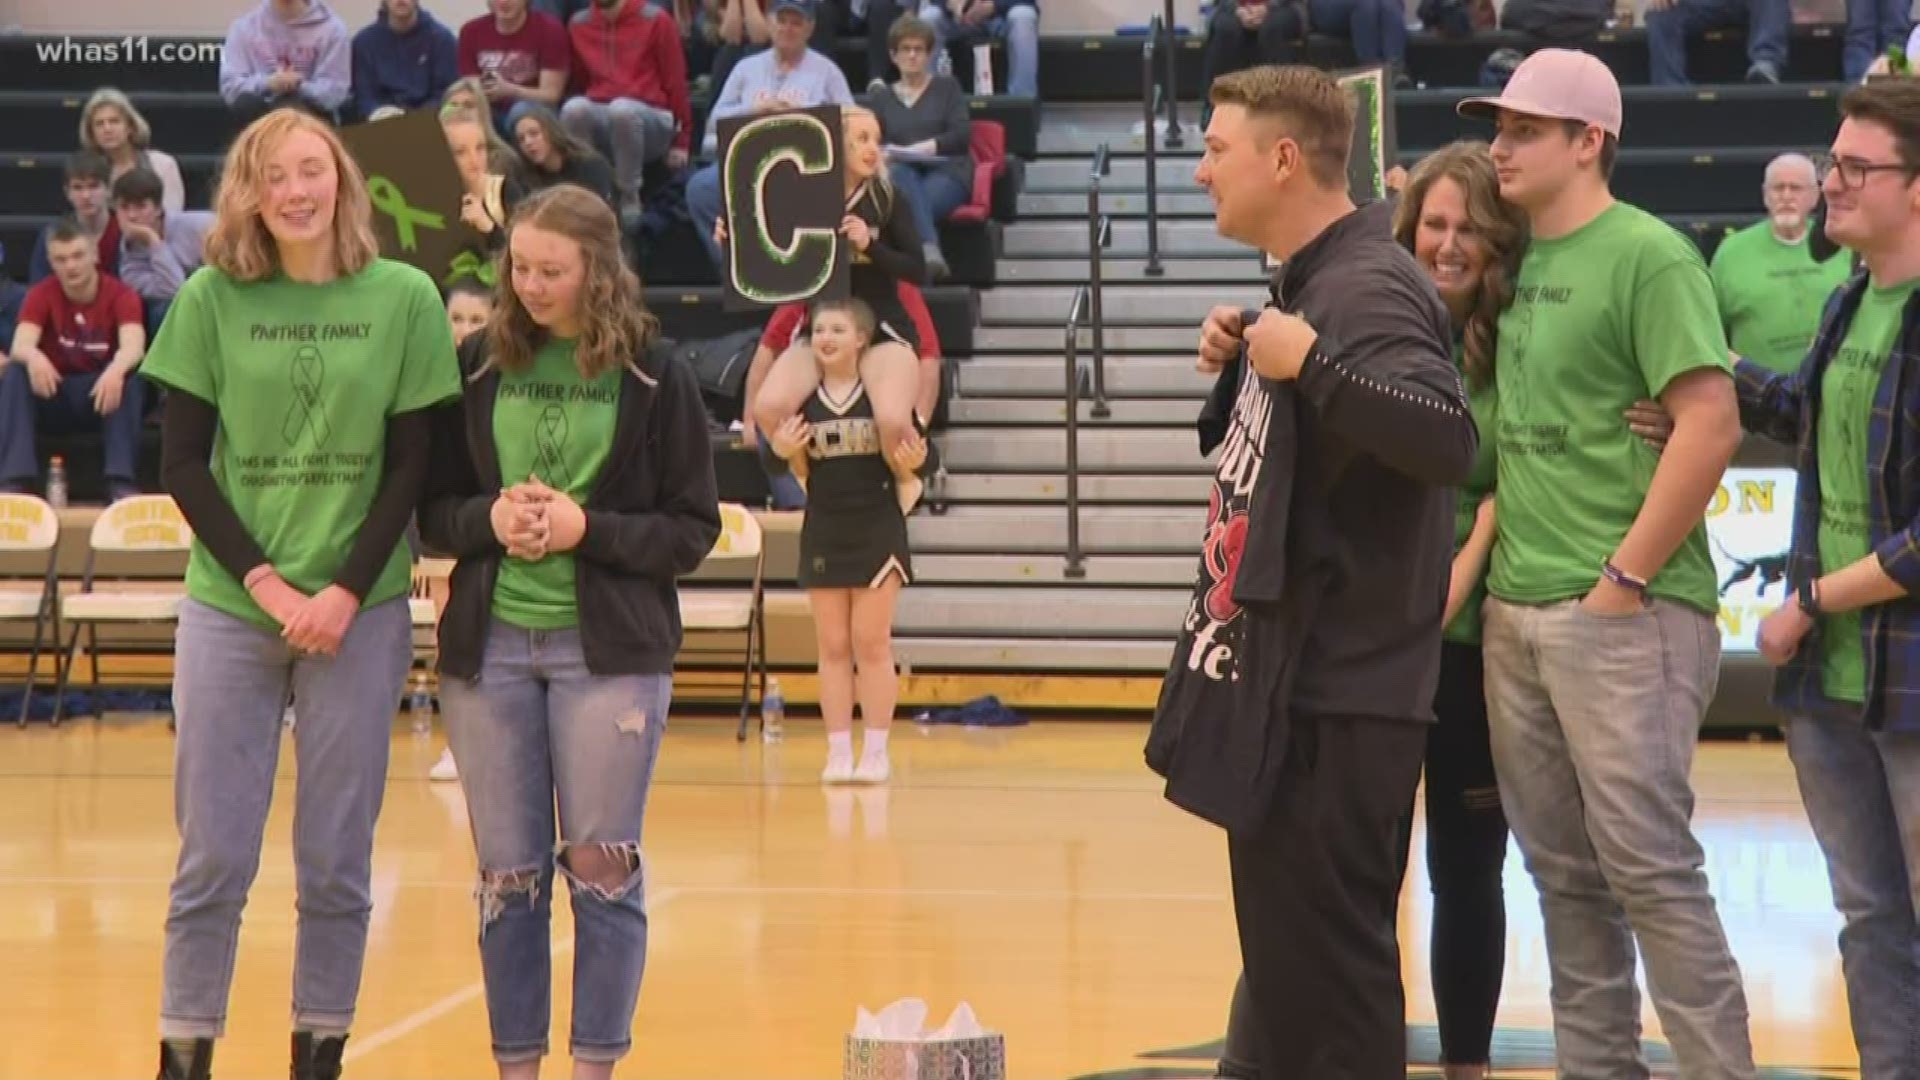 At a Corydon basketball game, the community turned out to show support for Coach Chase Best and his search for a kidney donor.